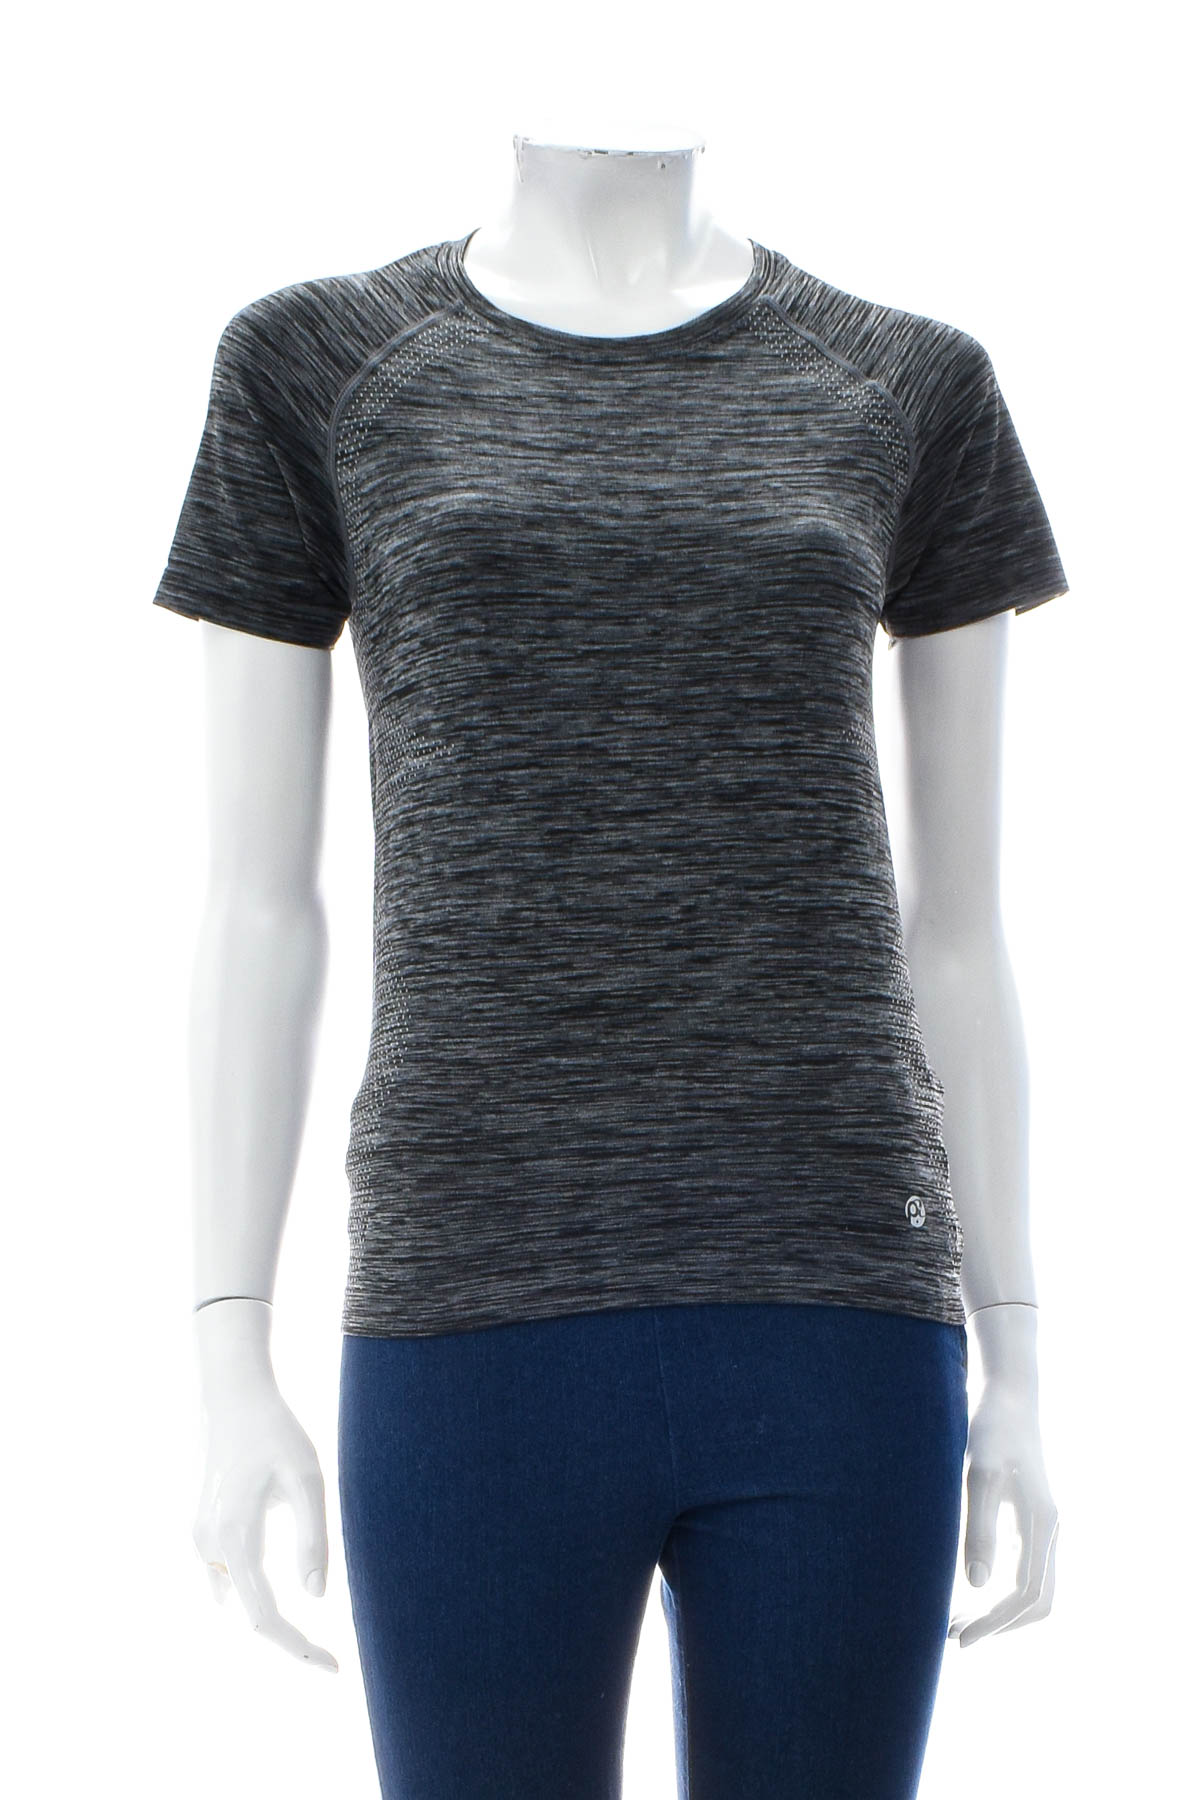 Women's t-shirt - Page One Active - 0